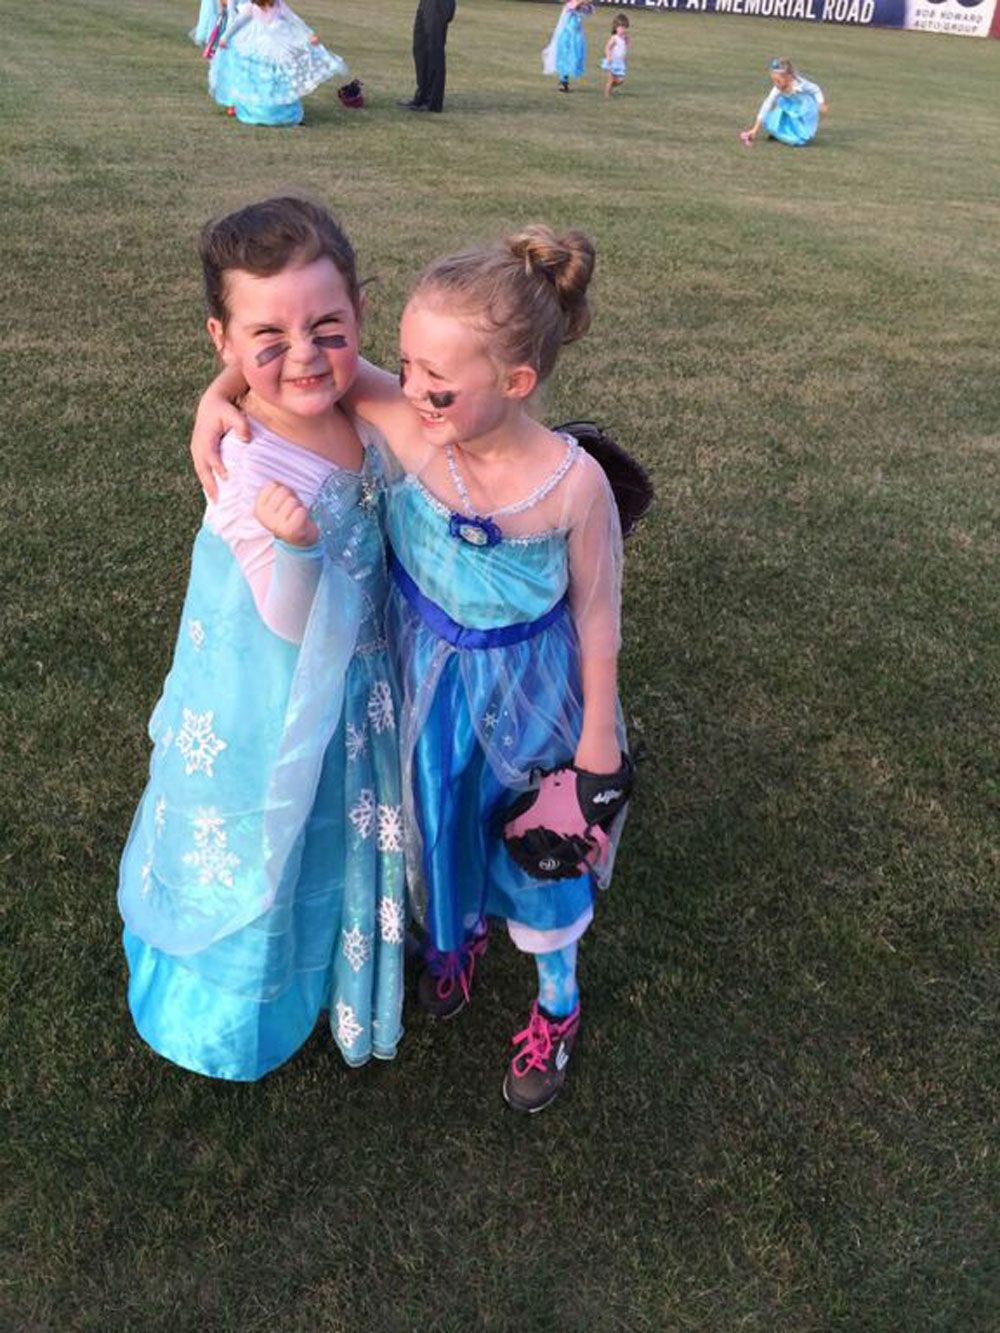 Everyone Is in Love With This "Frozen"-Themed Girls Softball Team 4